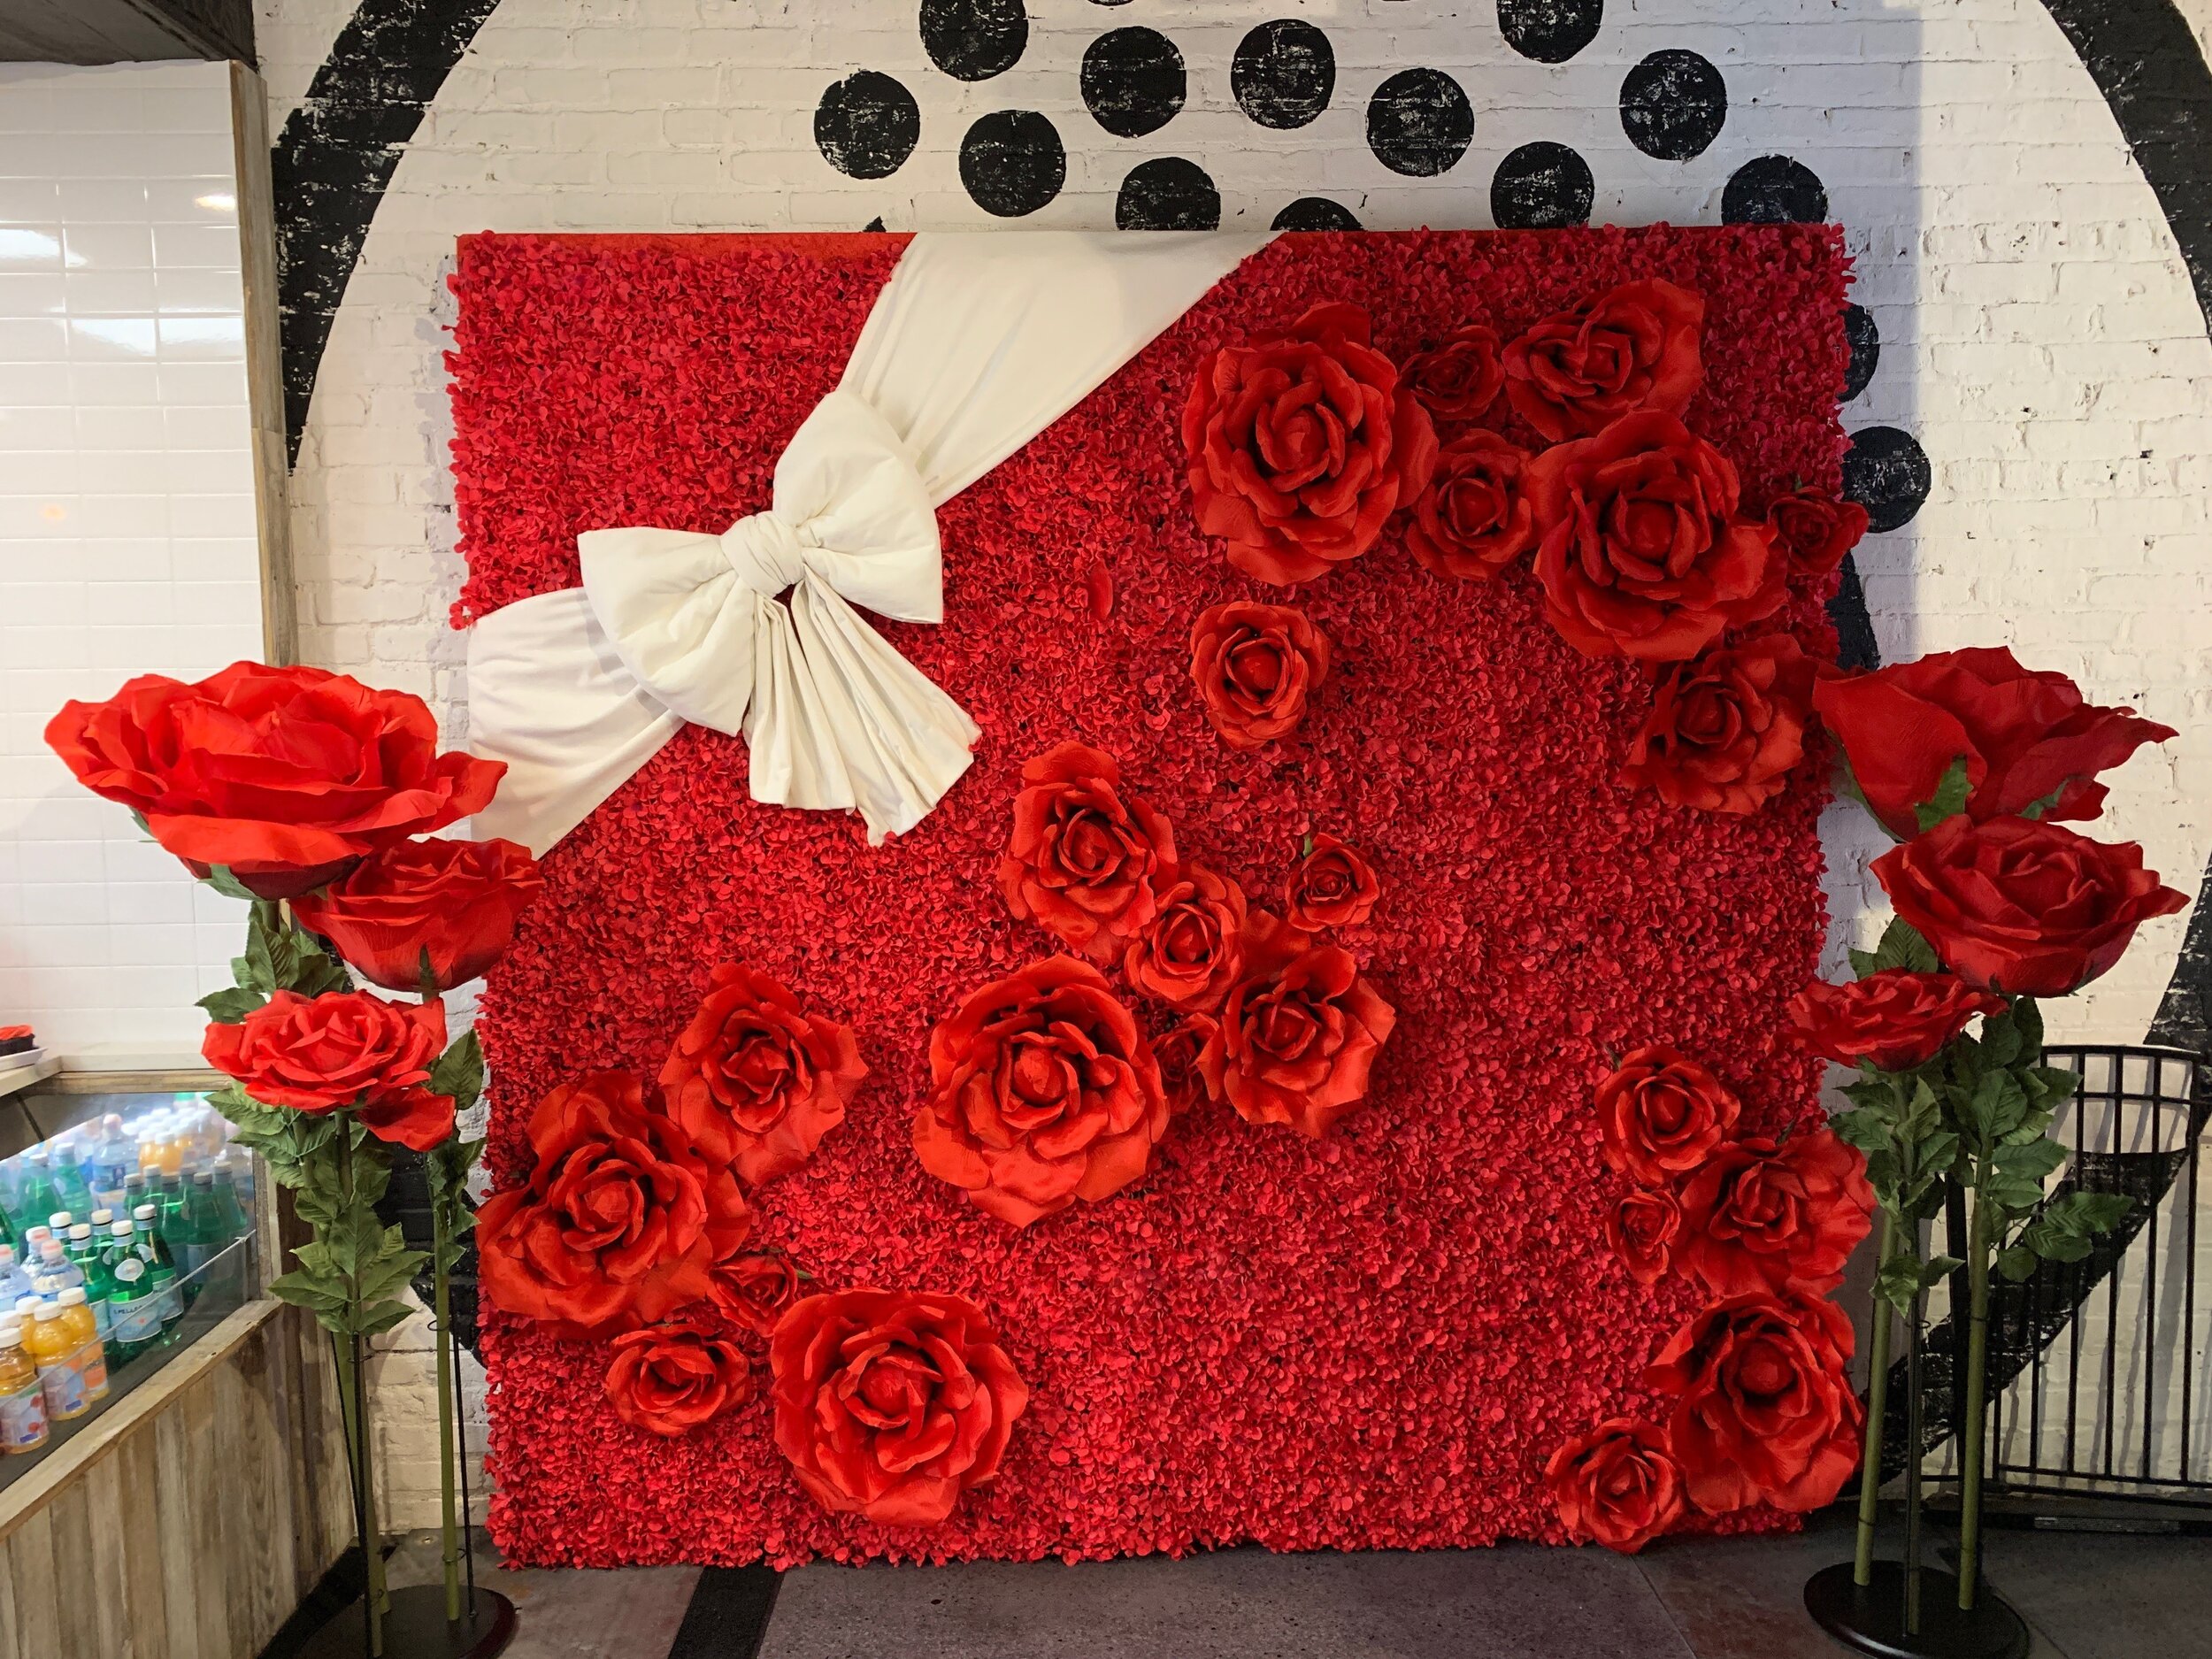 GoHeBe 7x5ft Red Wall Flowers Backdrop Red Wall Beautiful Flowers Interior Decoration Photography Backdrop Art Studio Photography Background Props Studio Display Mural LYP137 